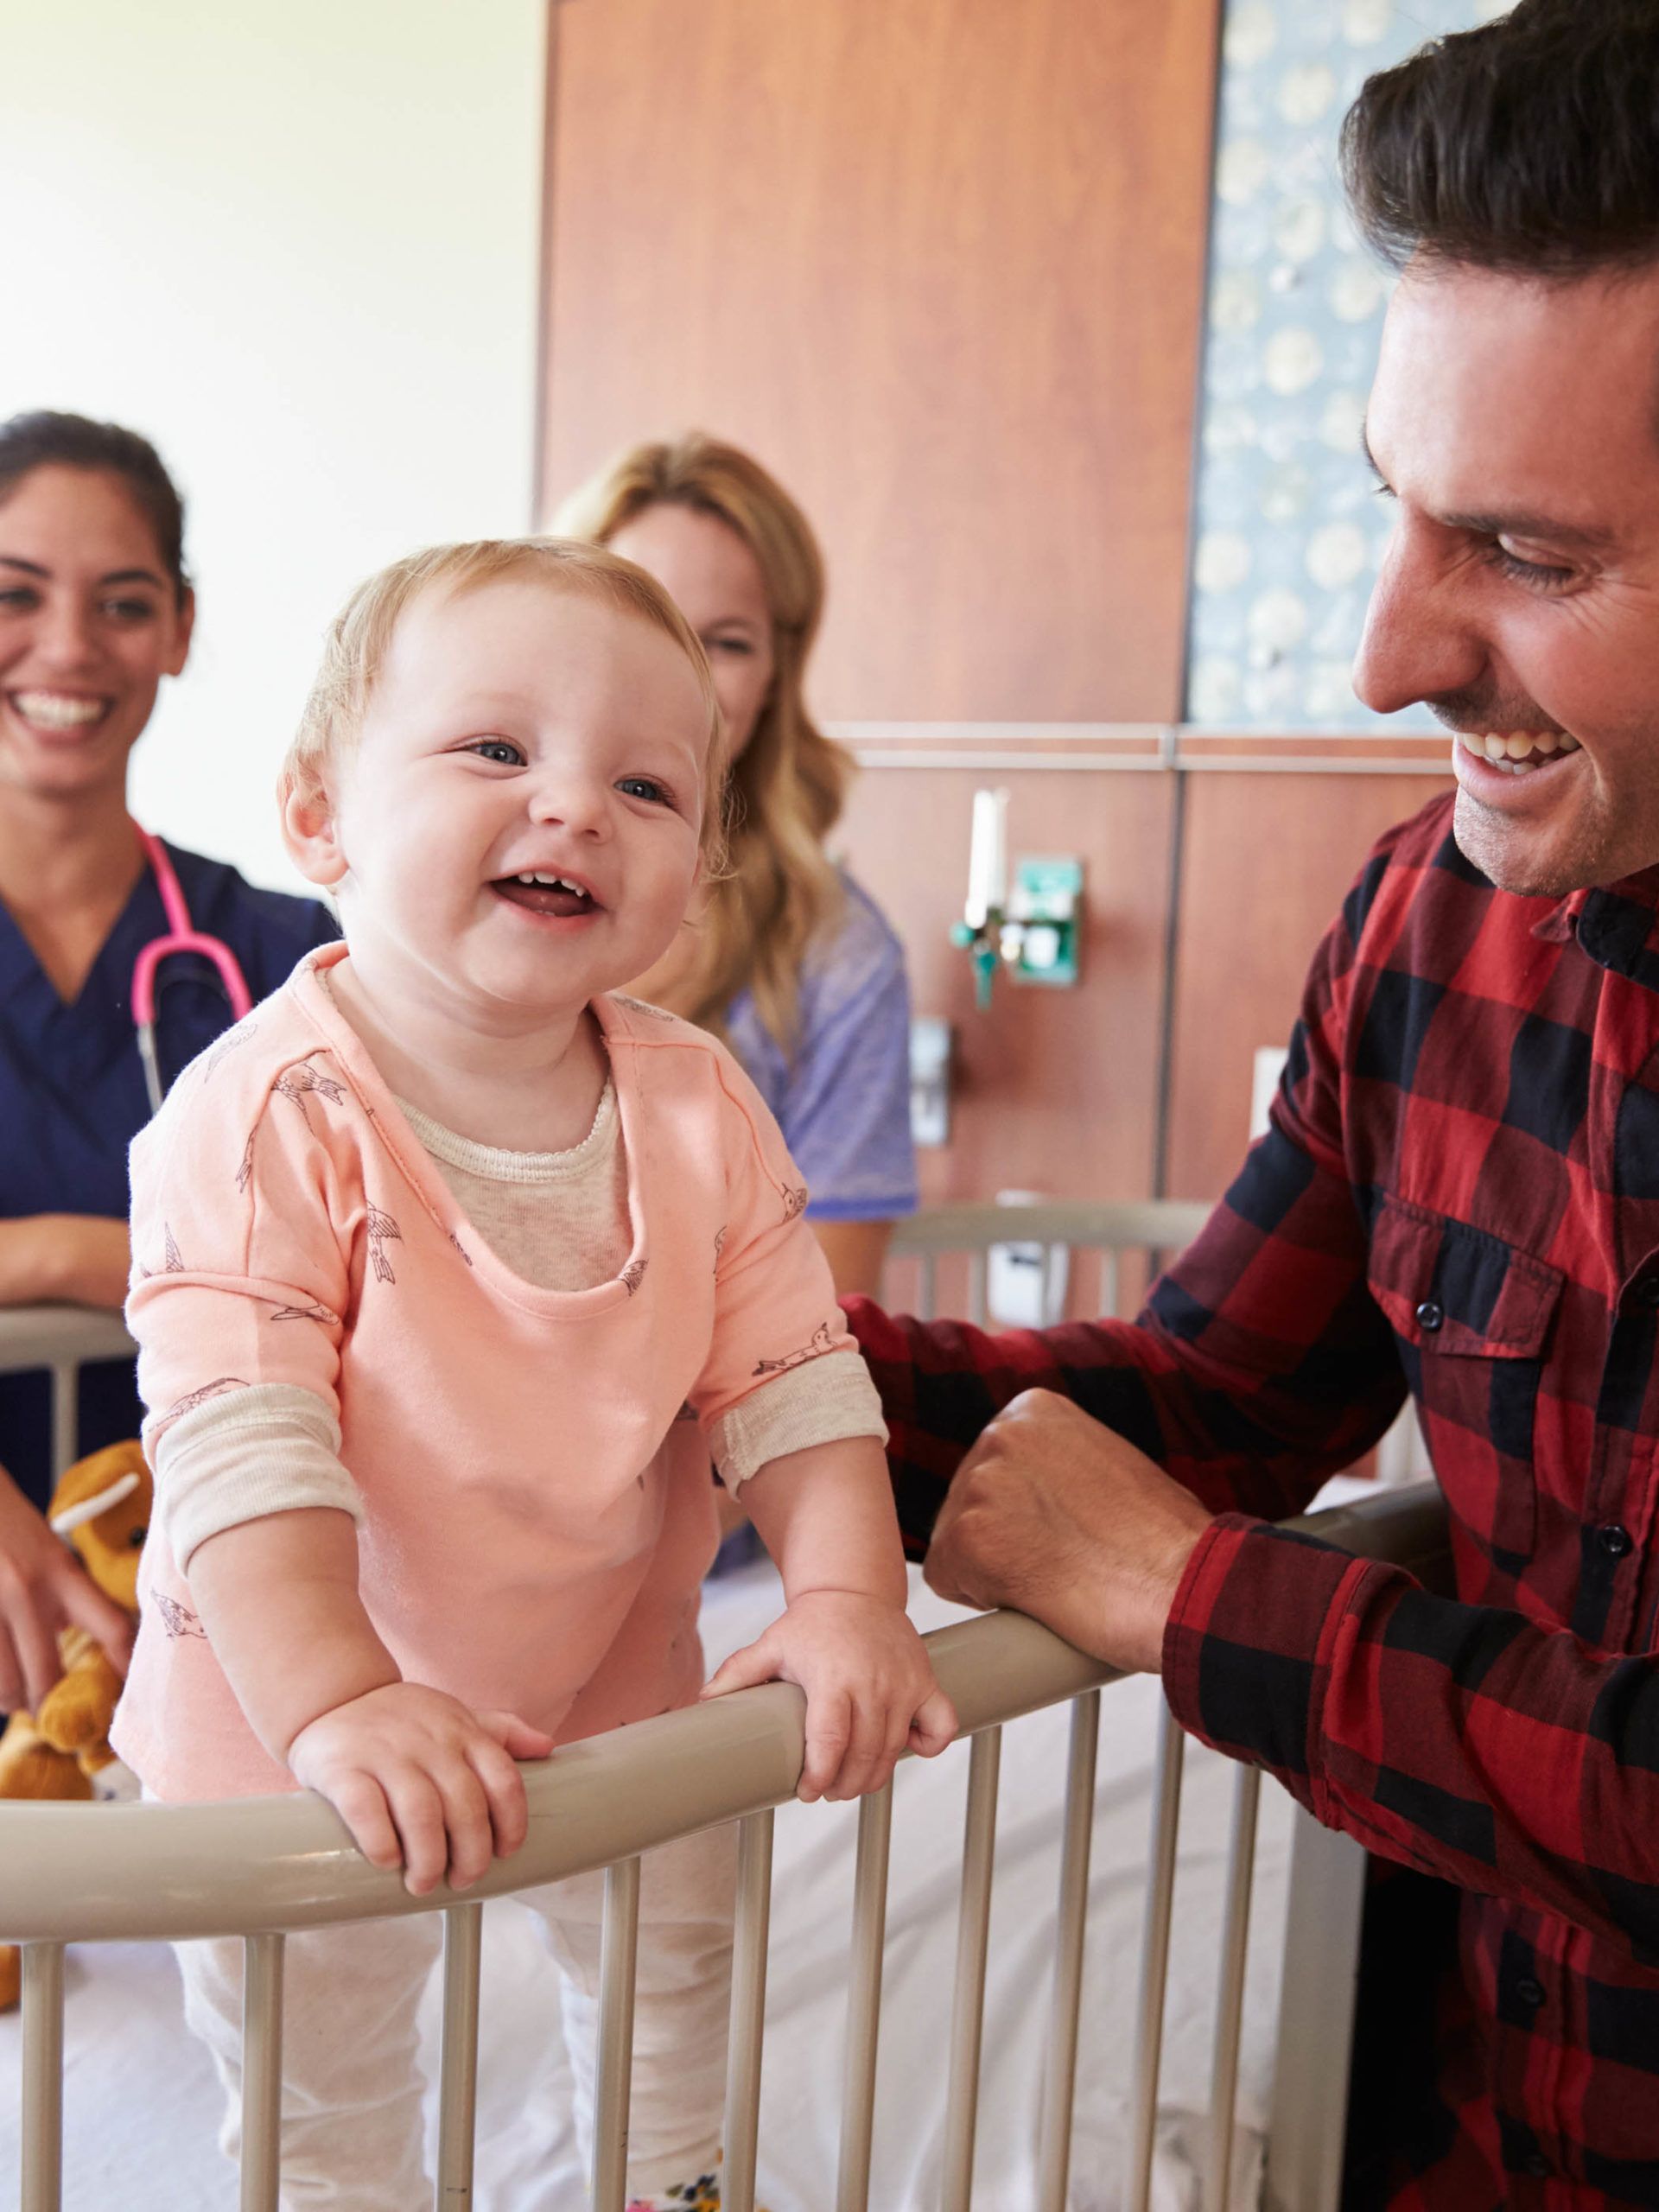 Happy toddler in hospital crib with dad, pediatrician and nurse